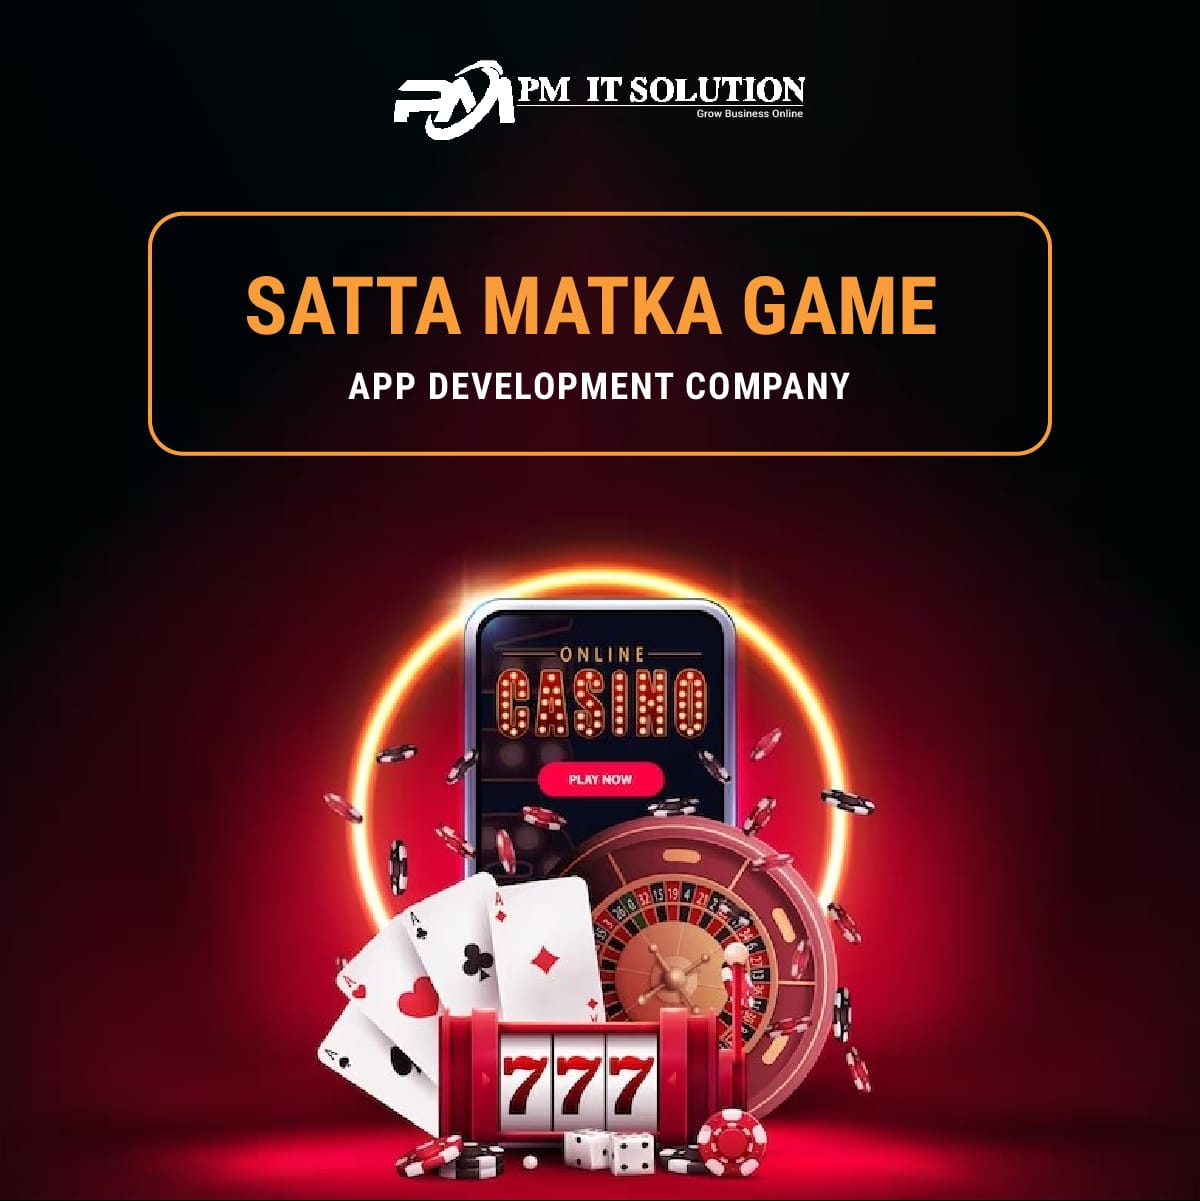 “Crafting Excellence: Leading Mobile Game & Satta Matka App Development Company”